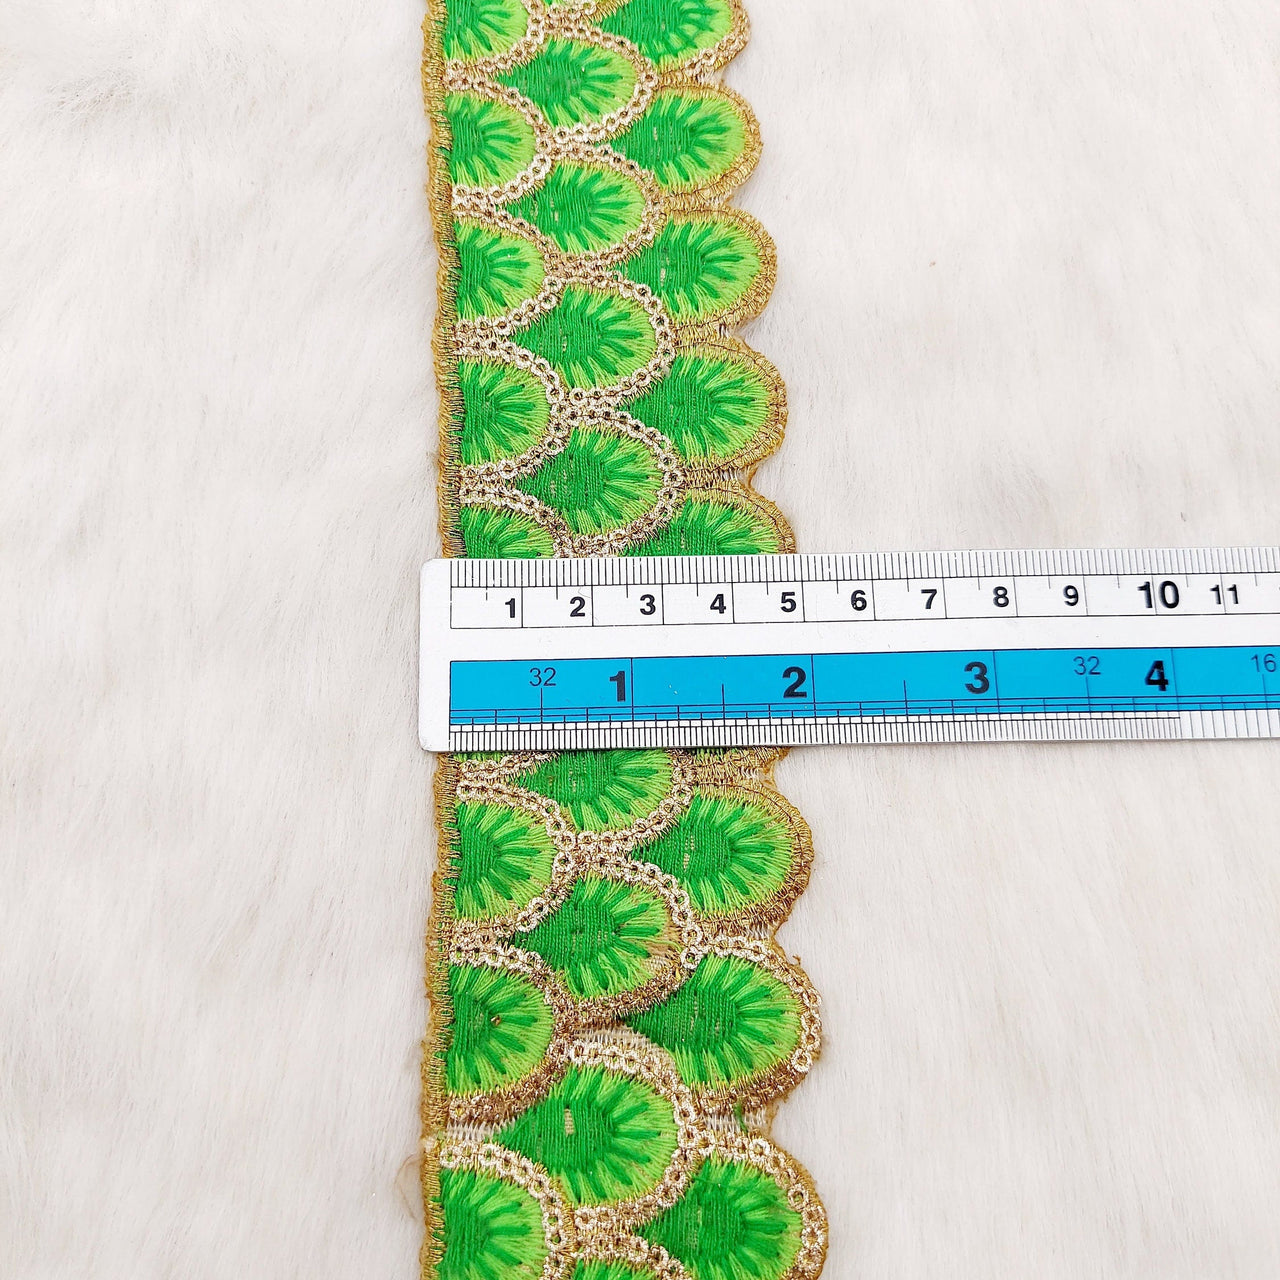 Trims: Green And Gold Embroidered Scallop Lace Trim, Approx. 50mm wide, Christmas Trim